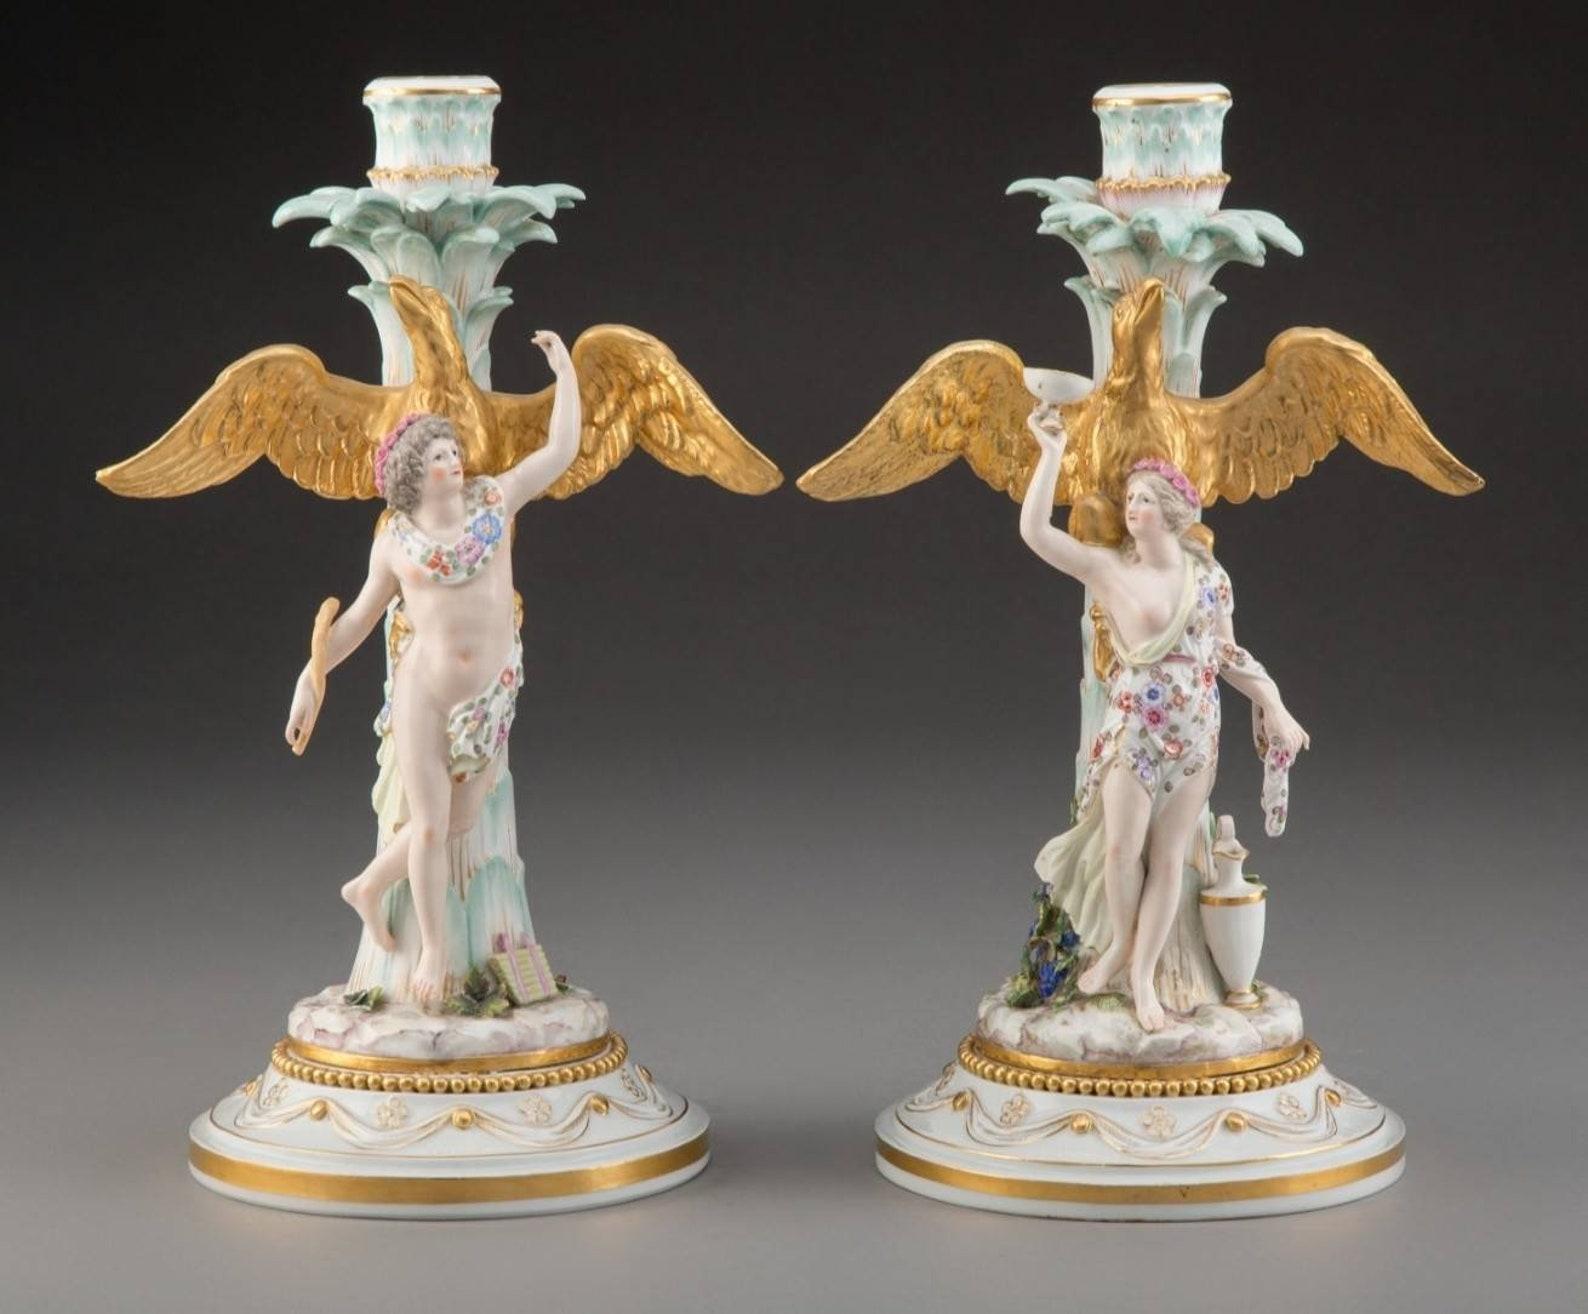 A scarce pair of magnificent Meissen polychrome and partial gilt porcelain candlesticks, inspired by Greek mythology, exquisitely hand-crafted in Rococo taste, Germany, 19th century.

The stunning, exceptionally executed, very fine quality antique